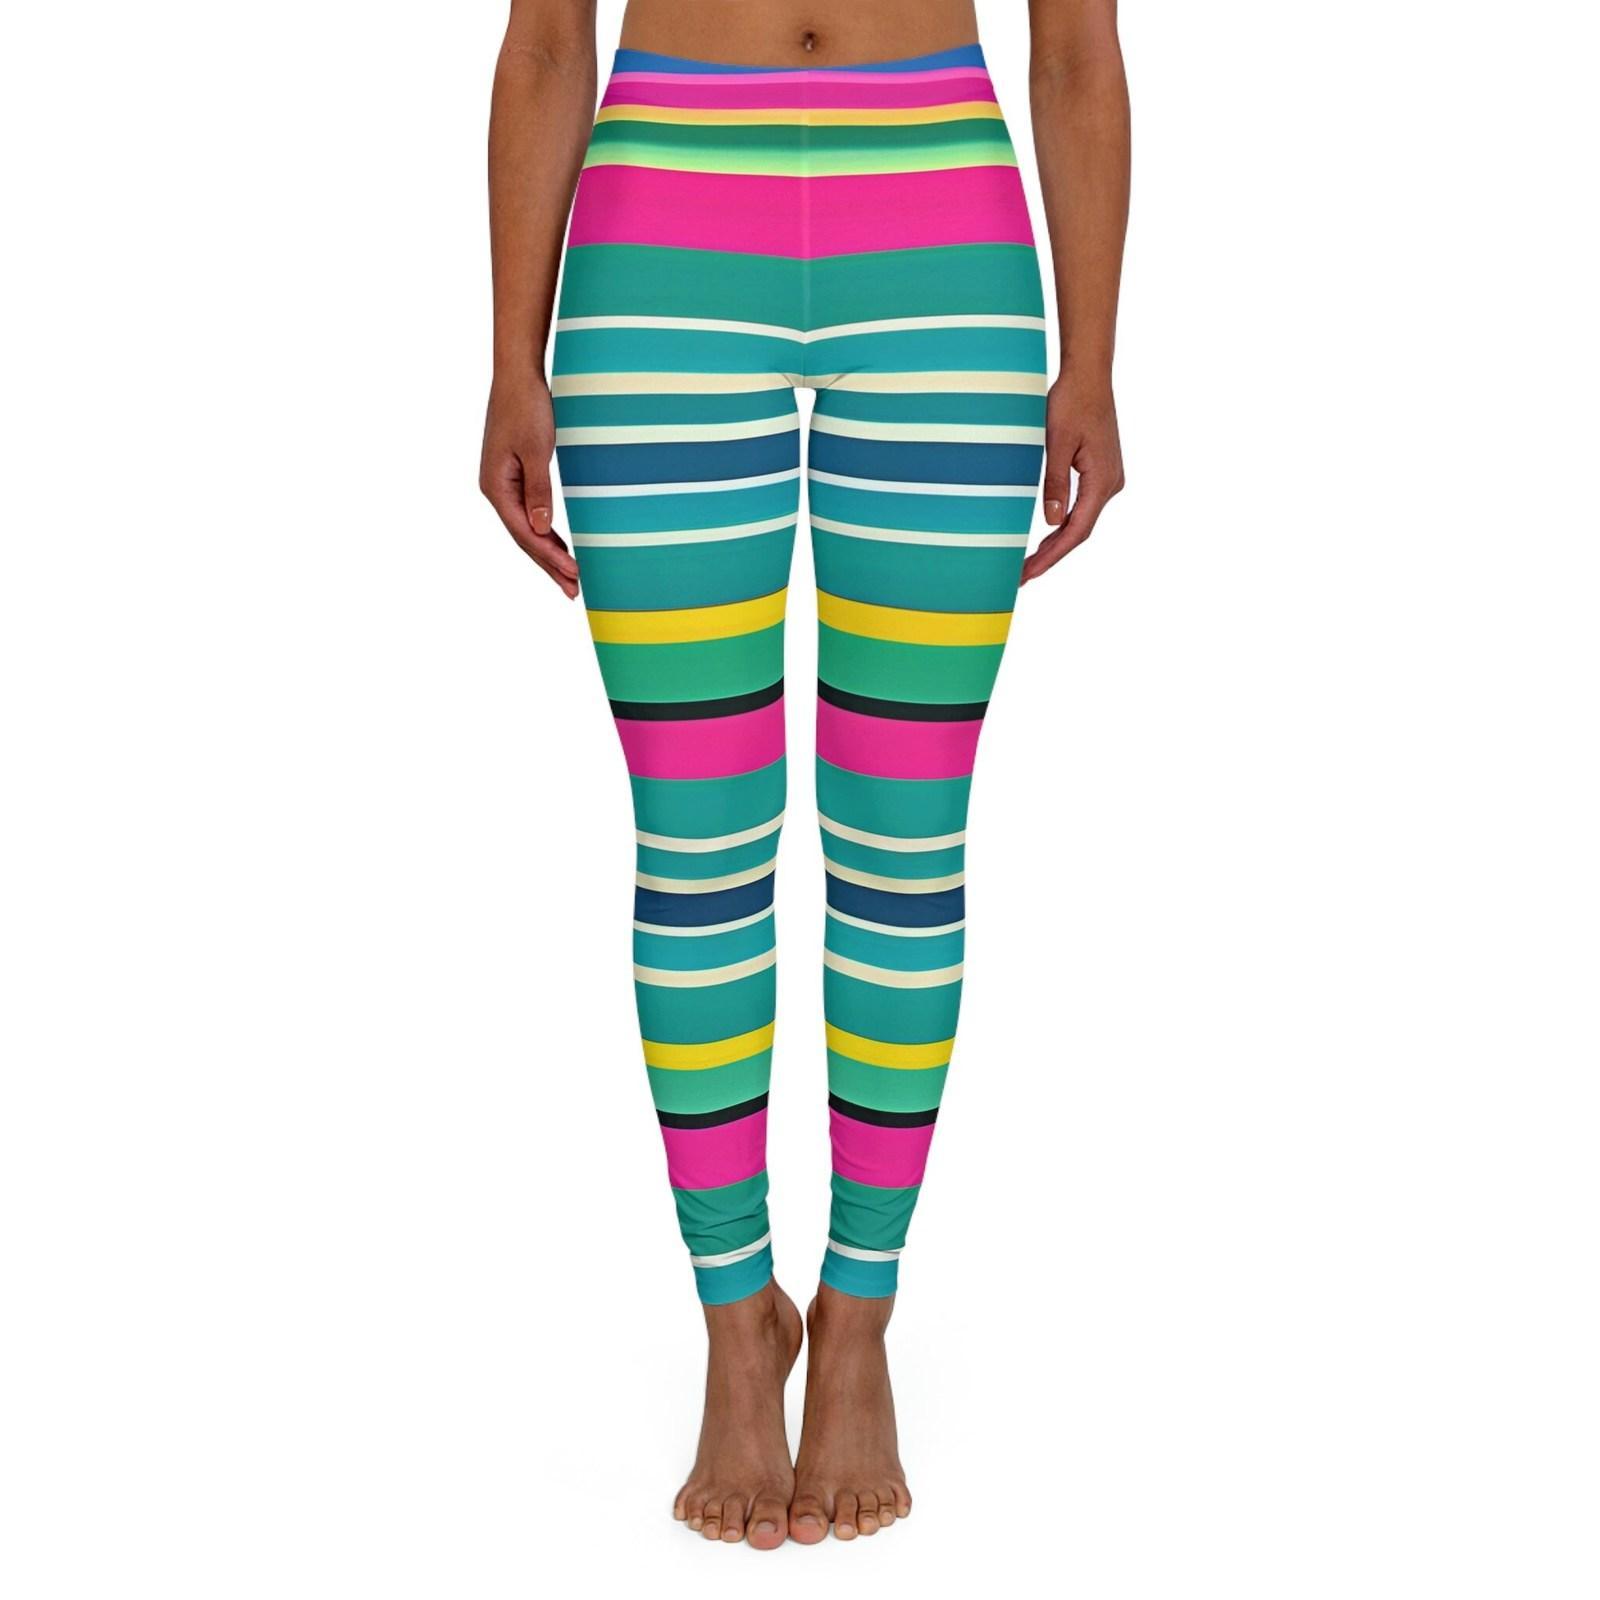 Womens leggings with Striped Pattern - Spandex leggings Soft Colorful Comfortab Product Image